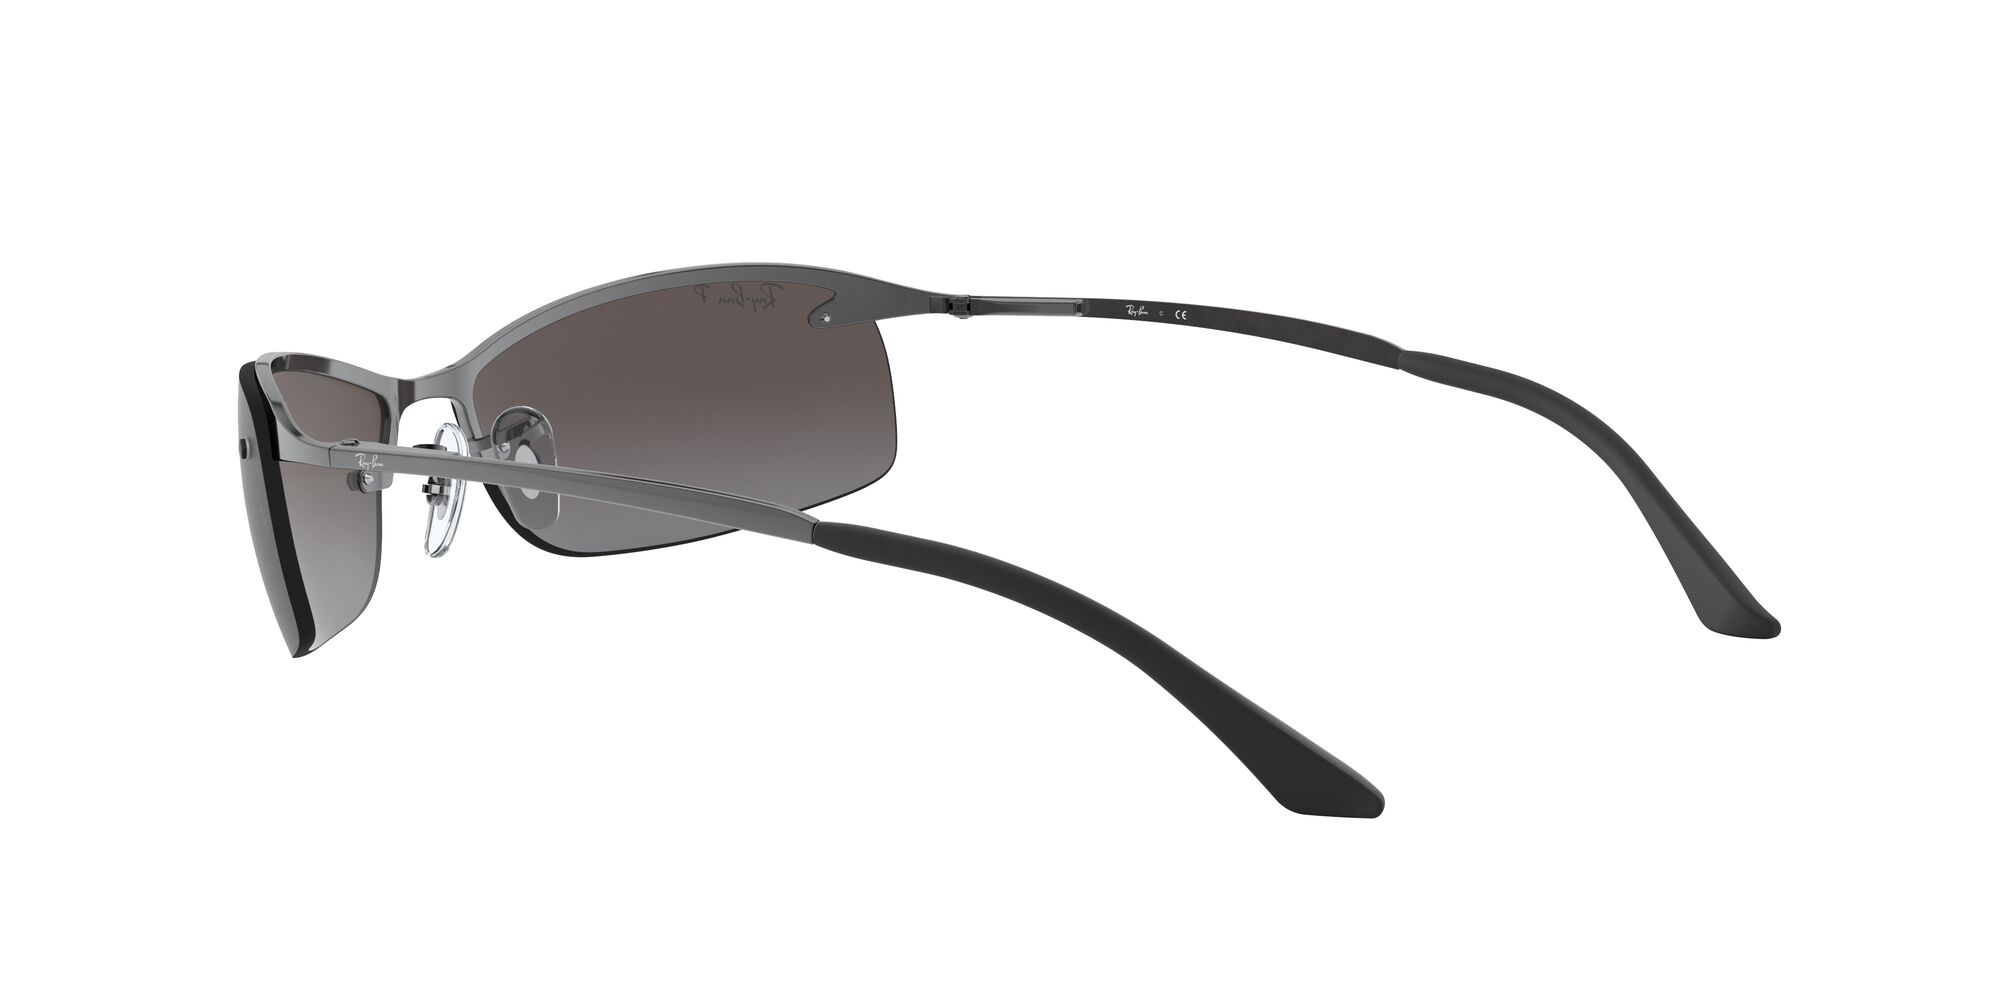 Ray-Ban RB3183 Adult Sunglasses - image 5 of 12